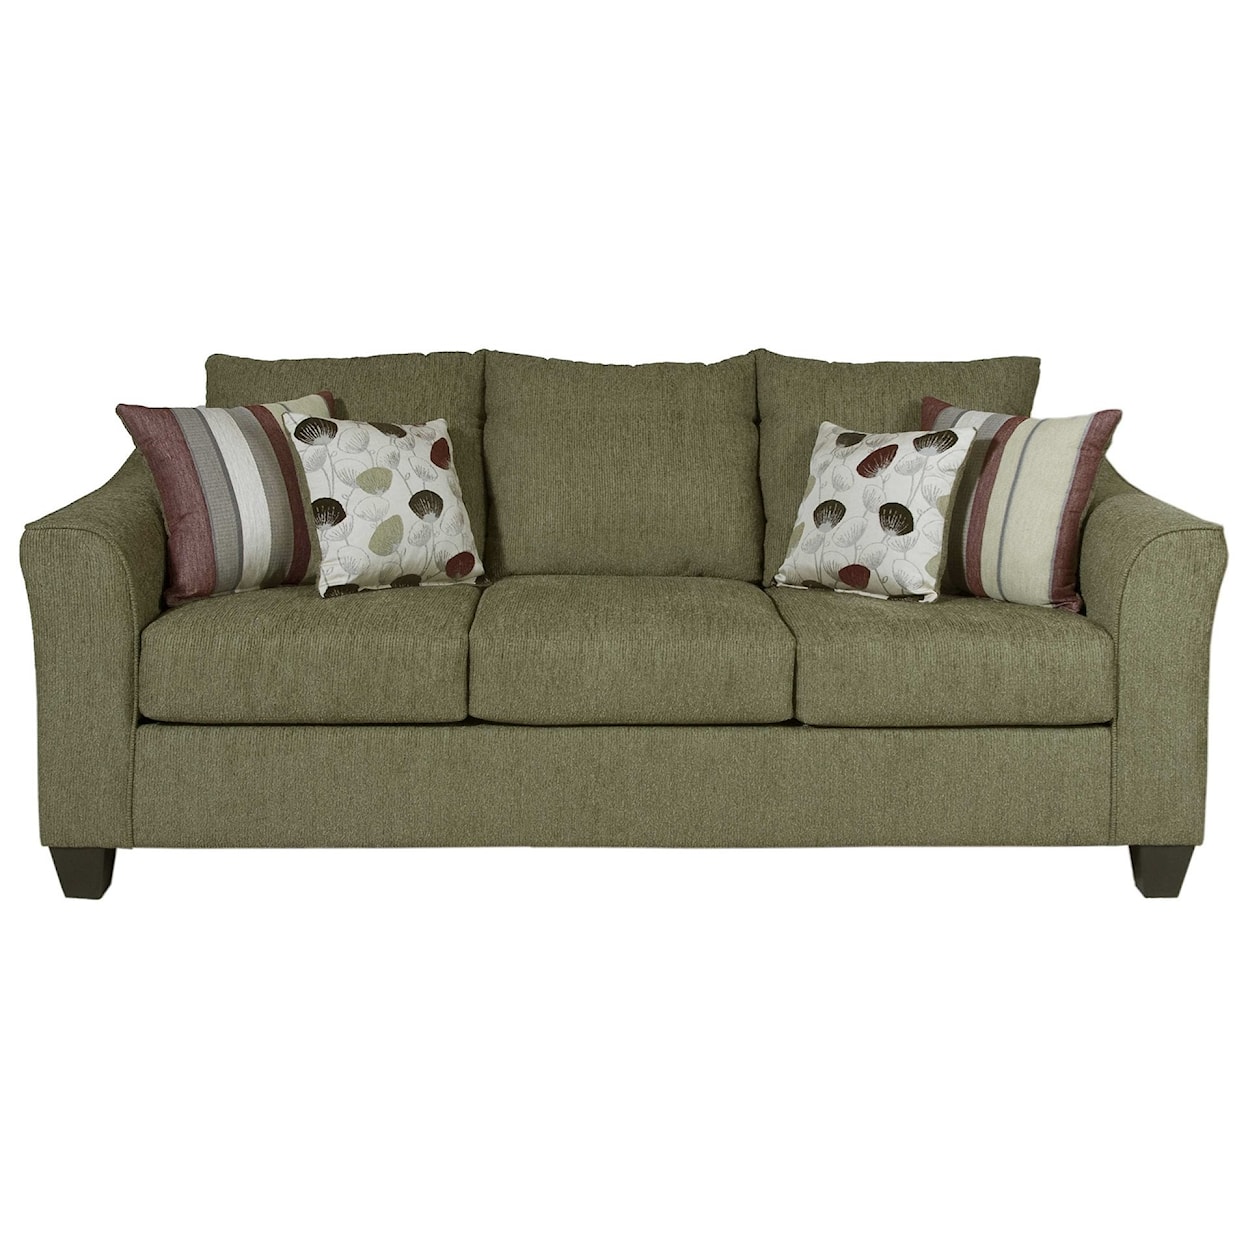 Serta Upholstery by Hughes Furniture 1225 Casual Upholstered Love Seat